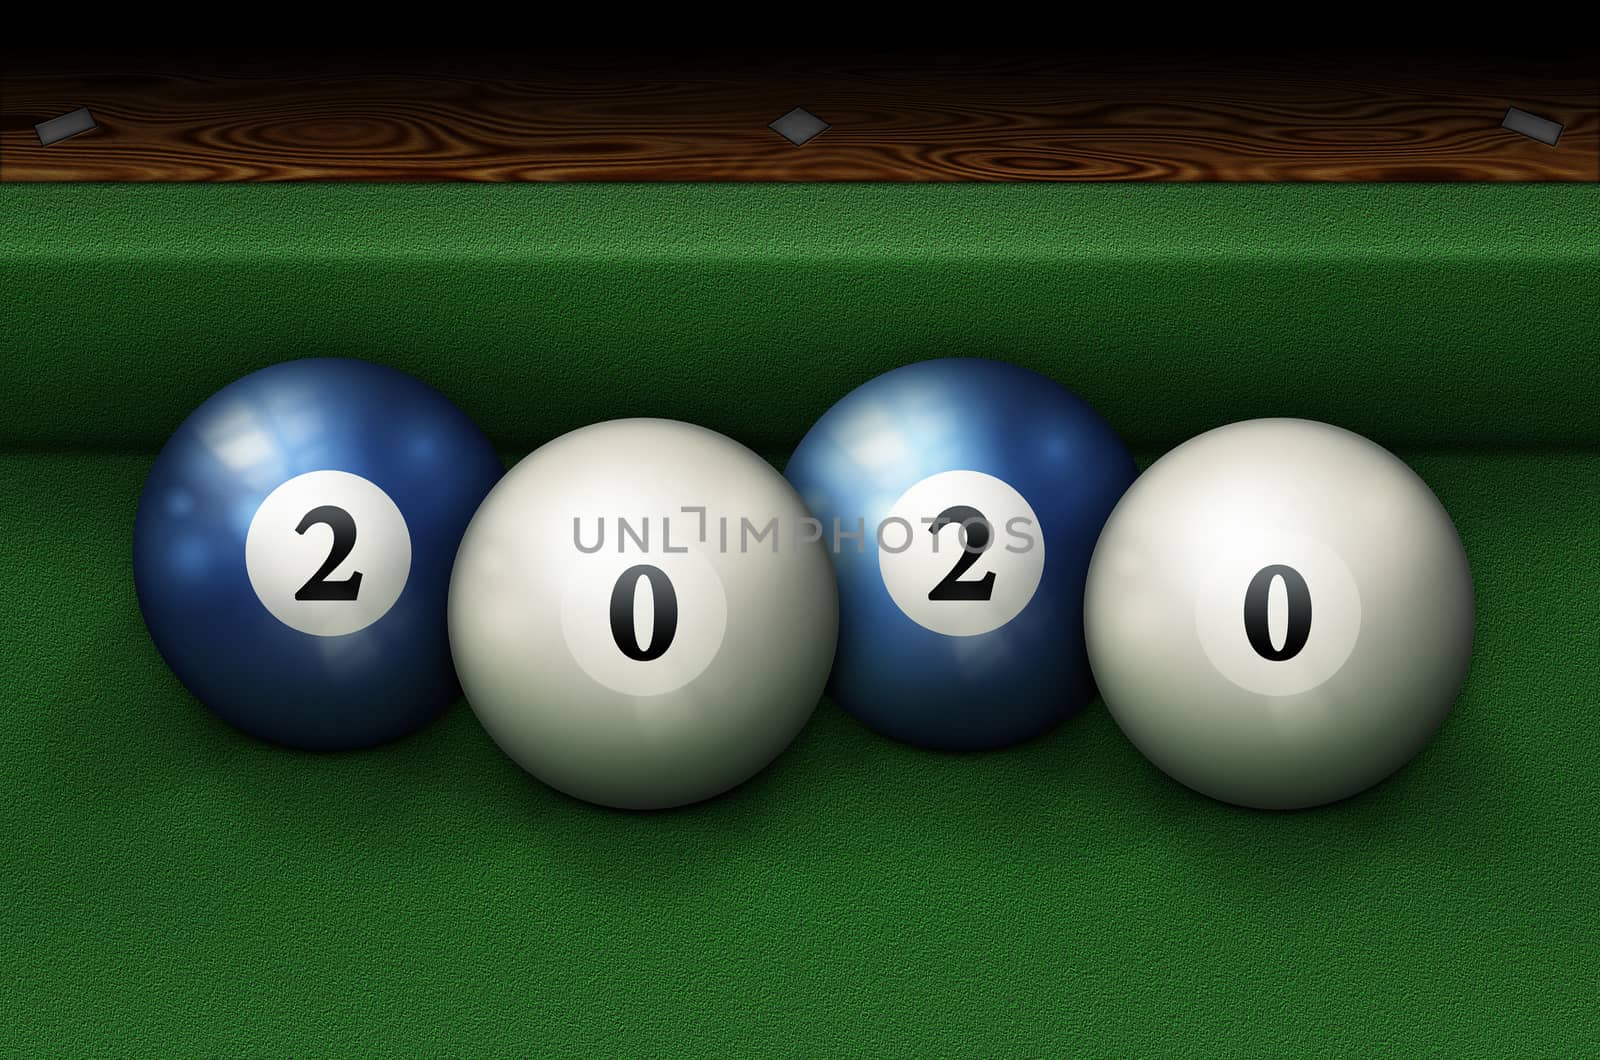 The year 2020 spelled out with pool balls on a billiards table. 3D Illustration